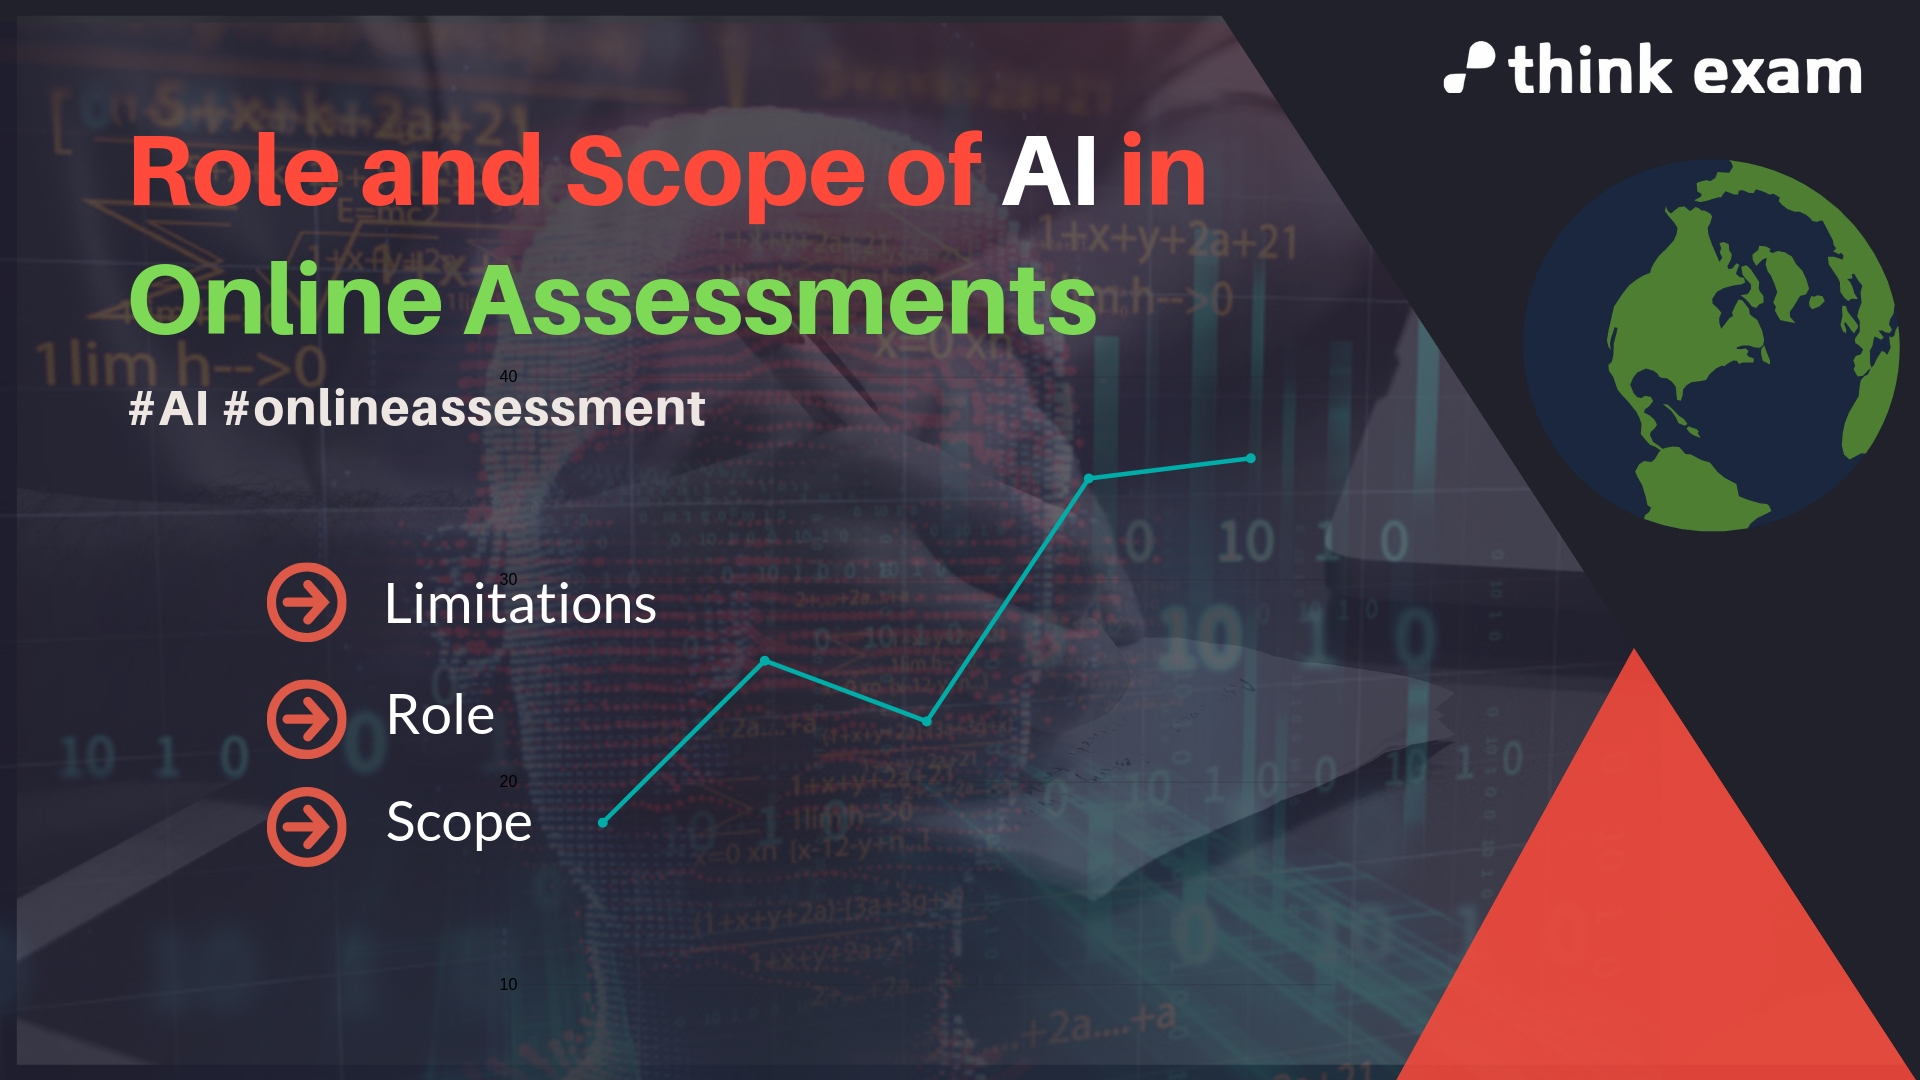 Role and Scope of AI in Online Assessments